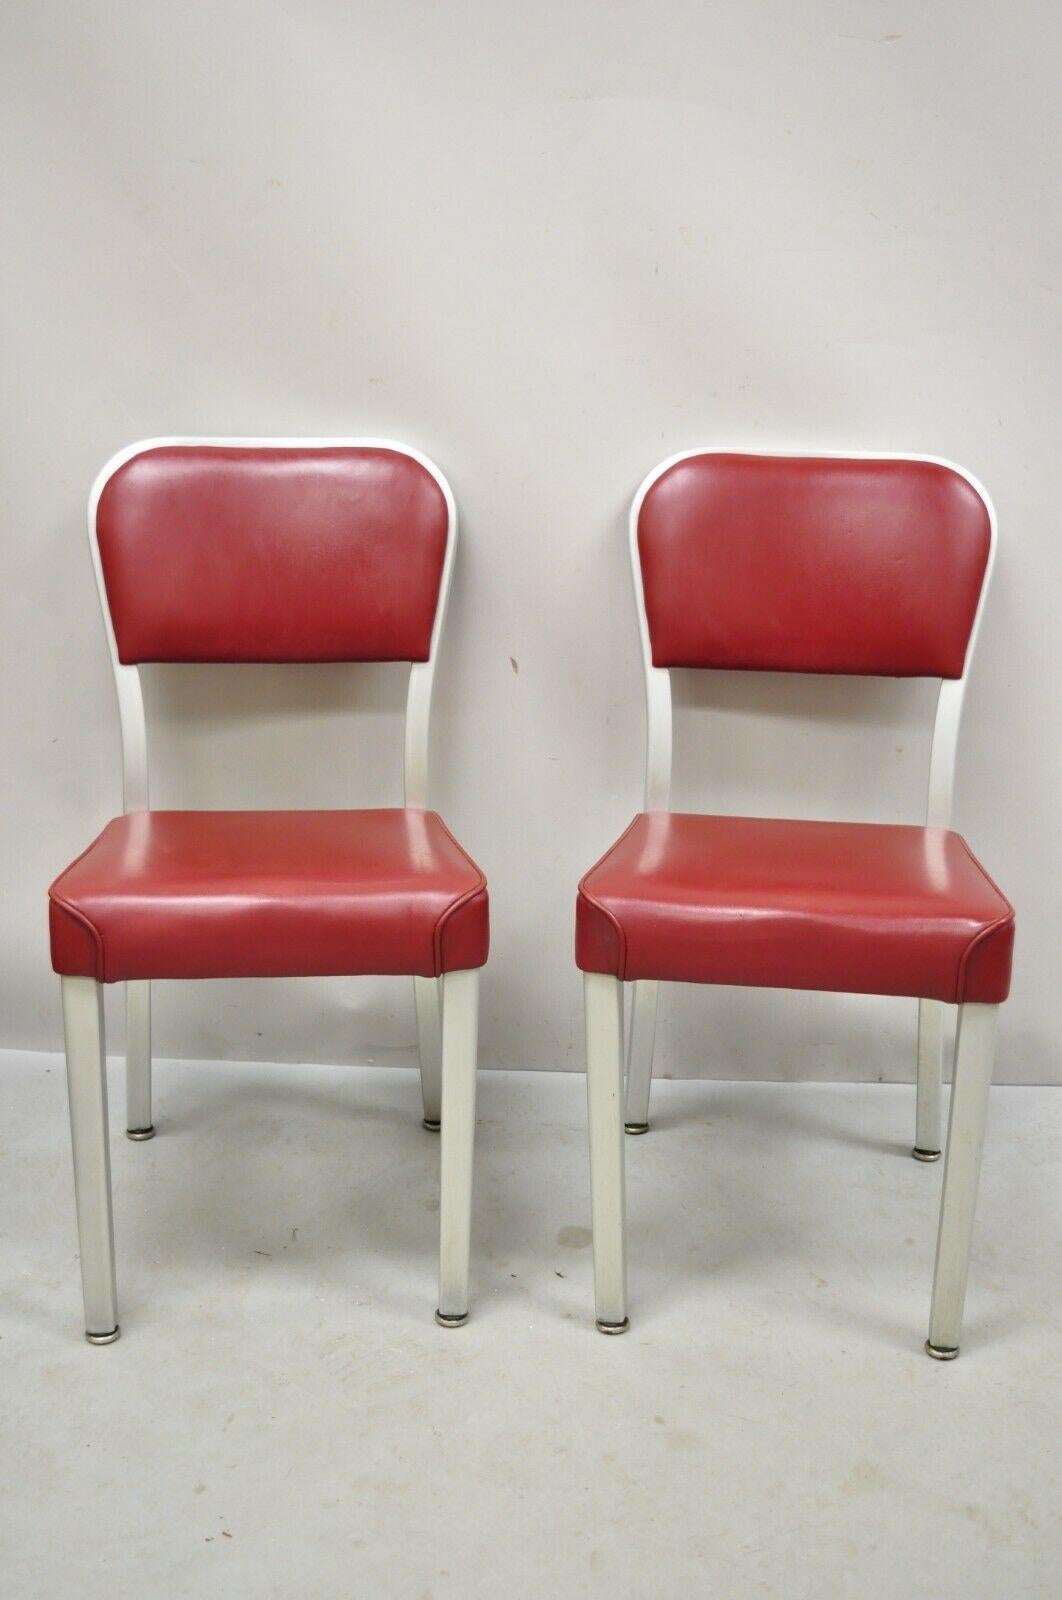 Vintage brushed aluminum red upholstered Emeco Navy Style side chairs - a pair. Item features brushed aluminum metal frames, red vinyl upholstery, marked 